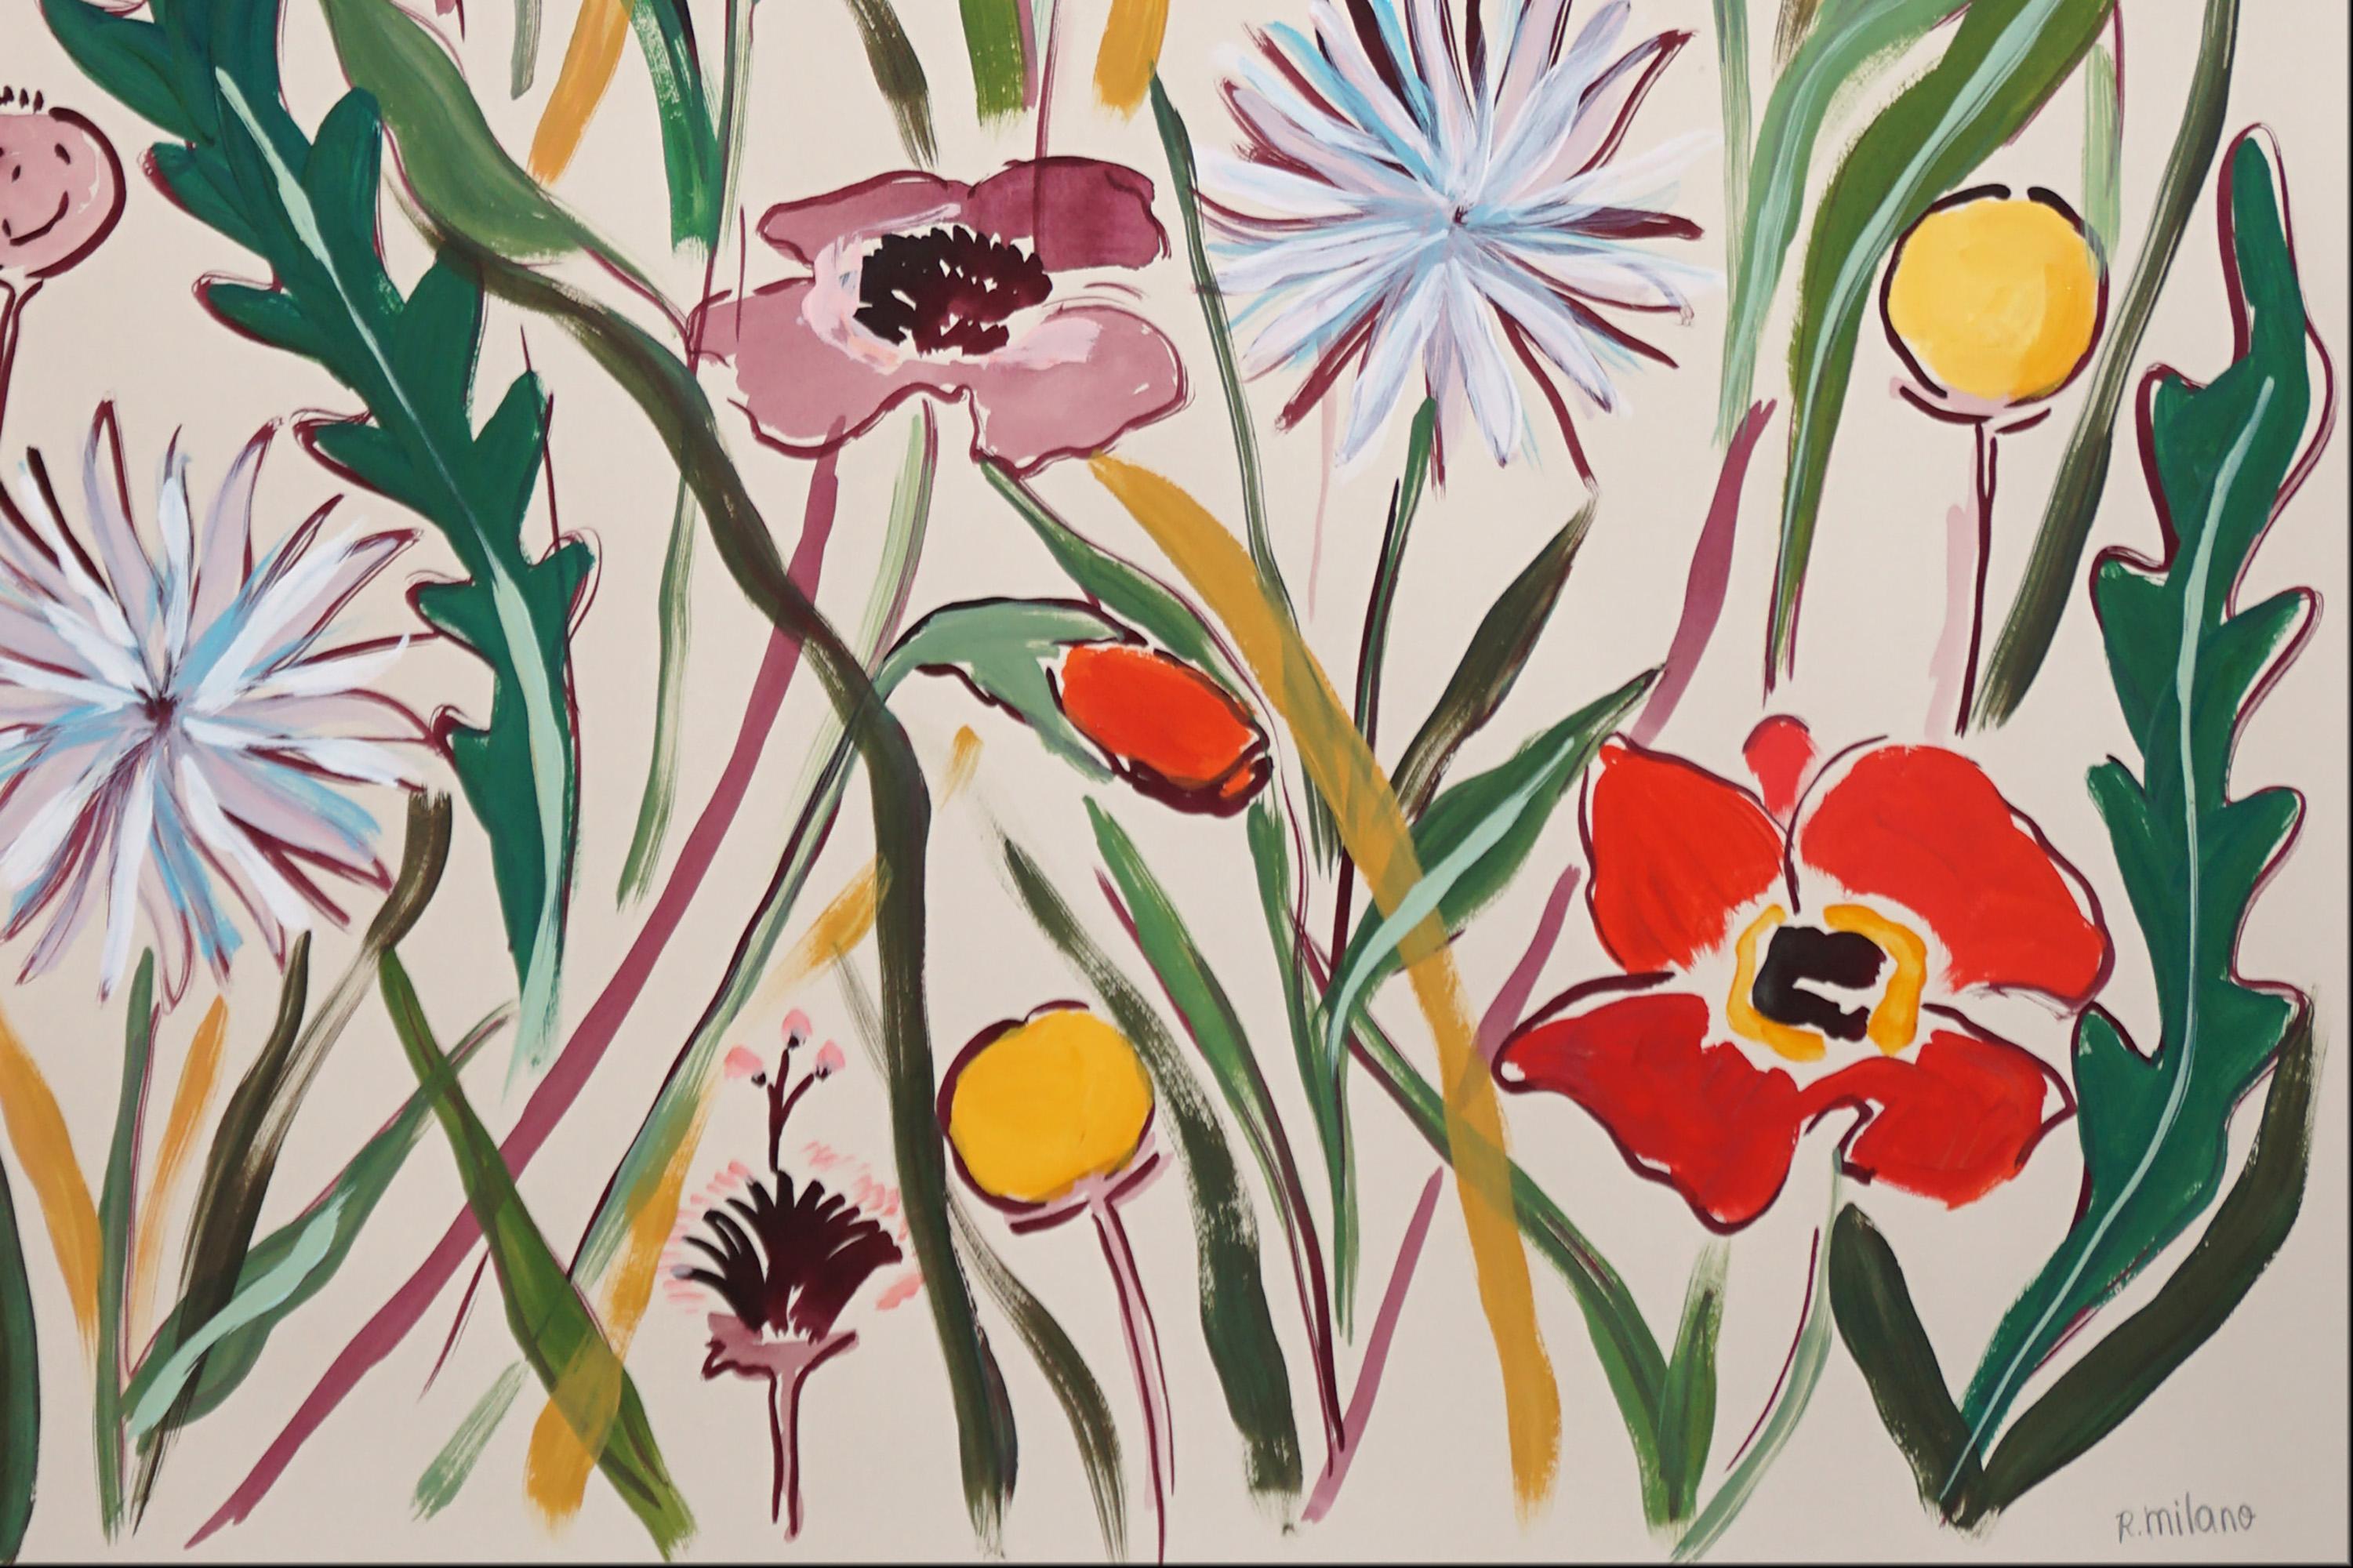 Pastel Wildflowers II, Illustration Style Diptych, Red Poppies and Dandelions  5